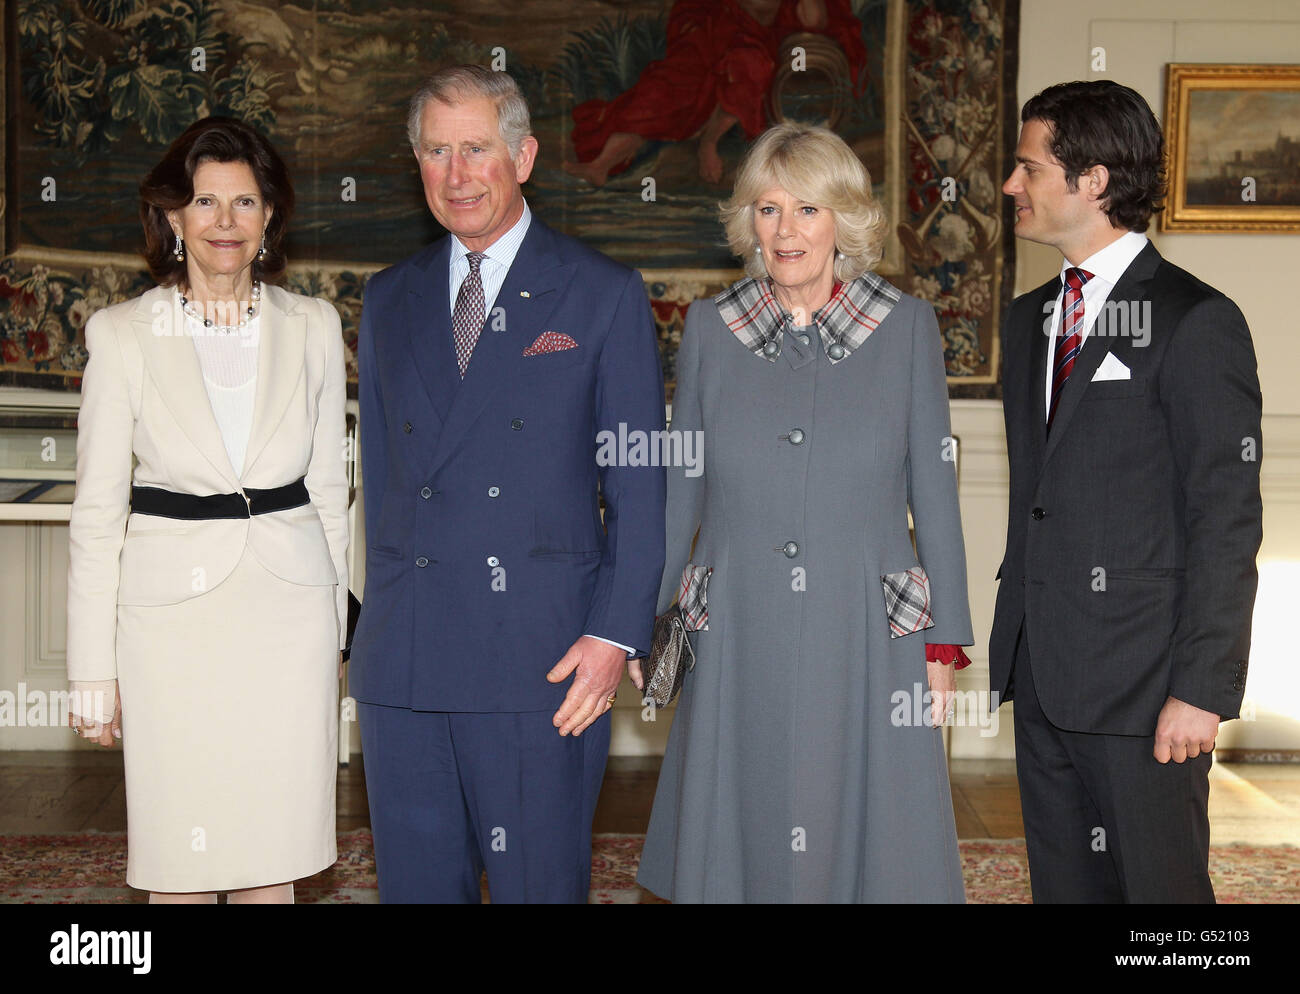 (left - right) Queen Silvia of Sweden, The Prince of Wales, The Duchess of Cornwall and Prince Carl Philip of Sweden pose for an official photo in the Royal Palace in Stockholm, Sweden. Stock Photo